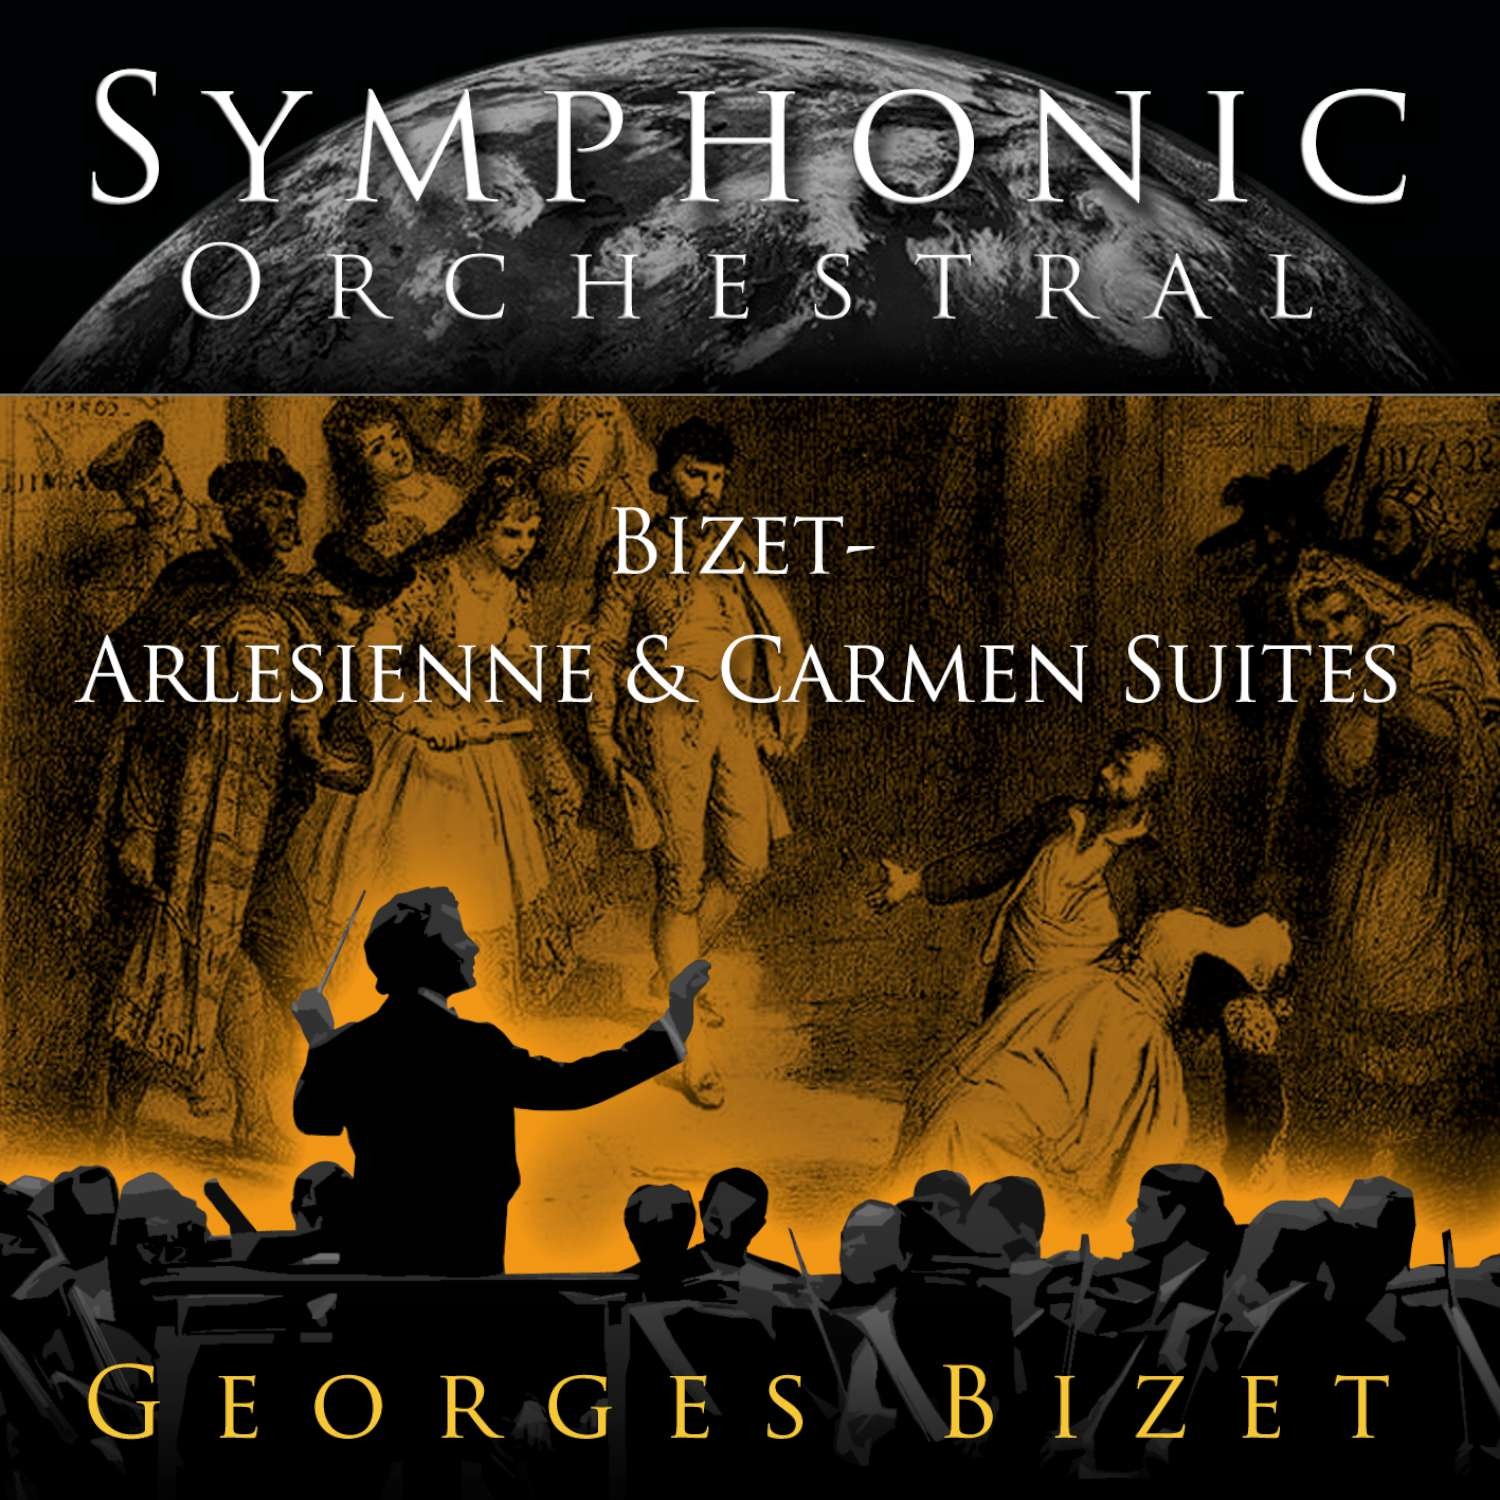 Carmen Suite #2 - Changing of the Guard